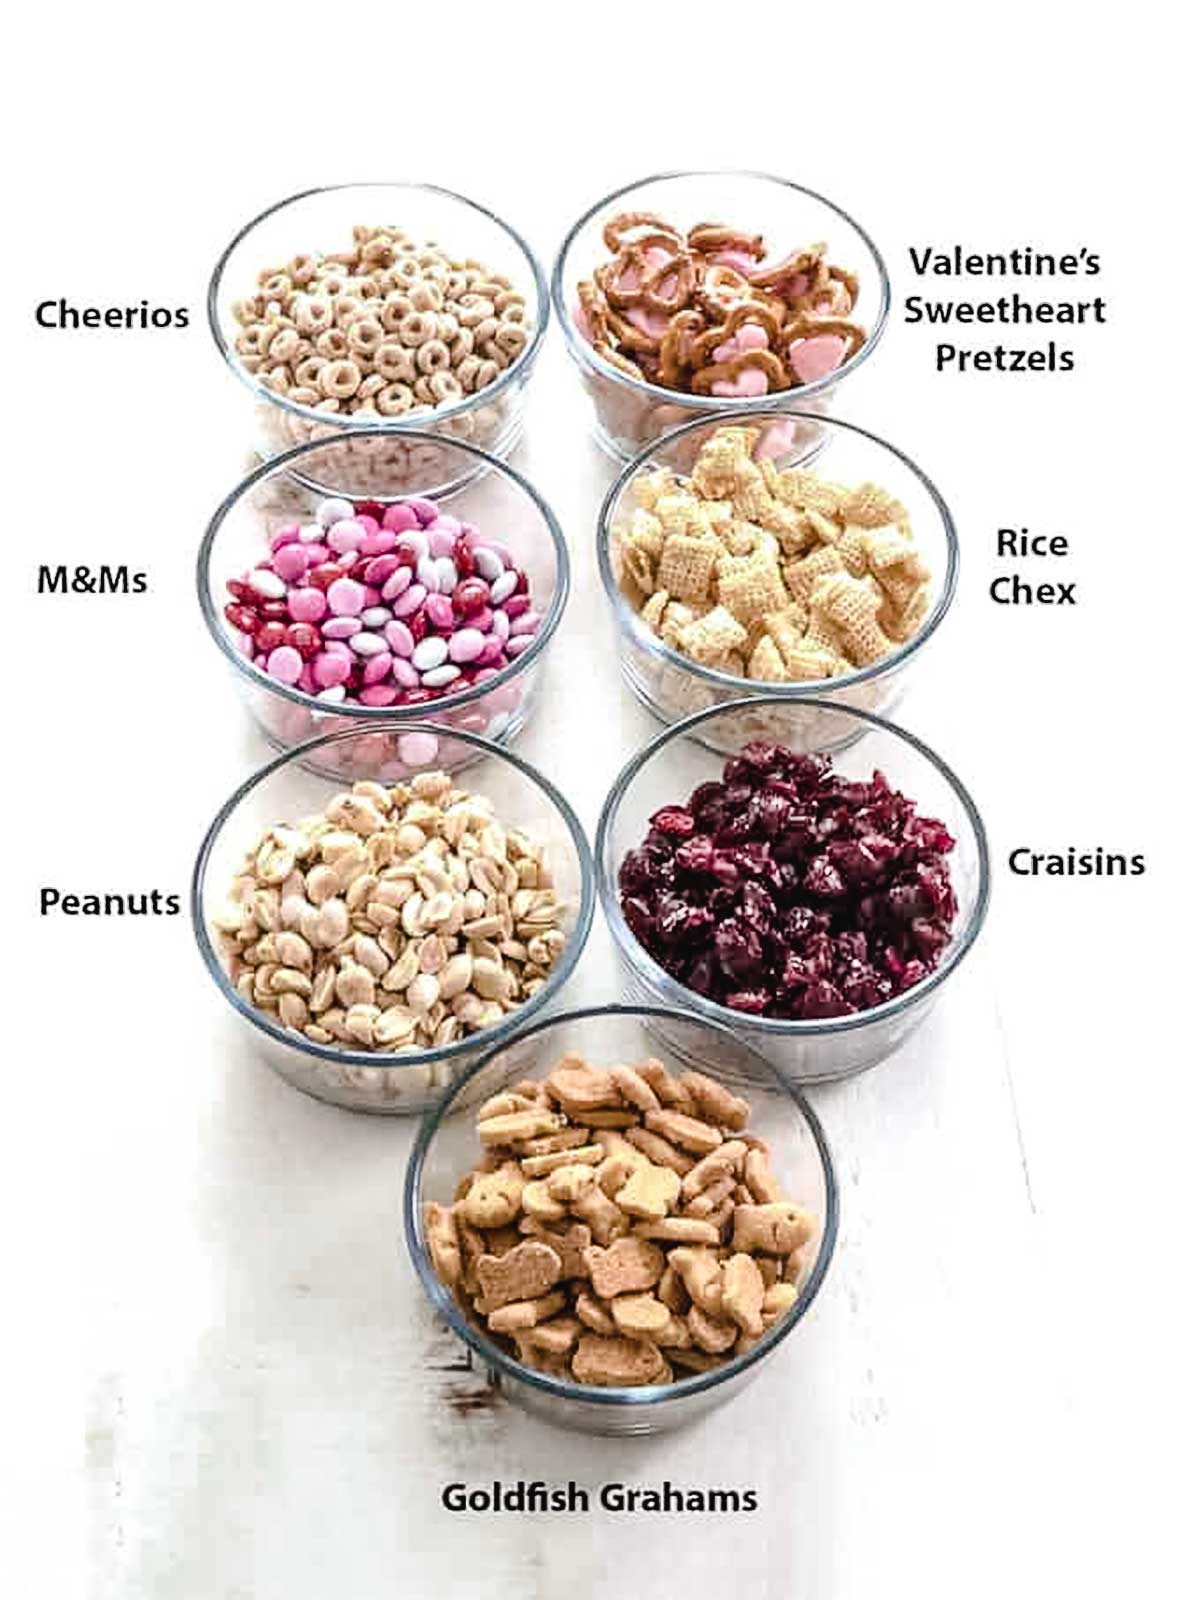 Ingredients used for Cupid's Crunch